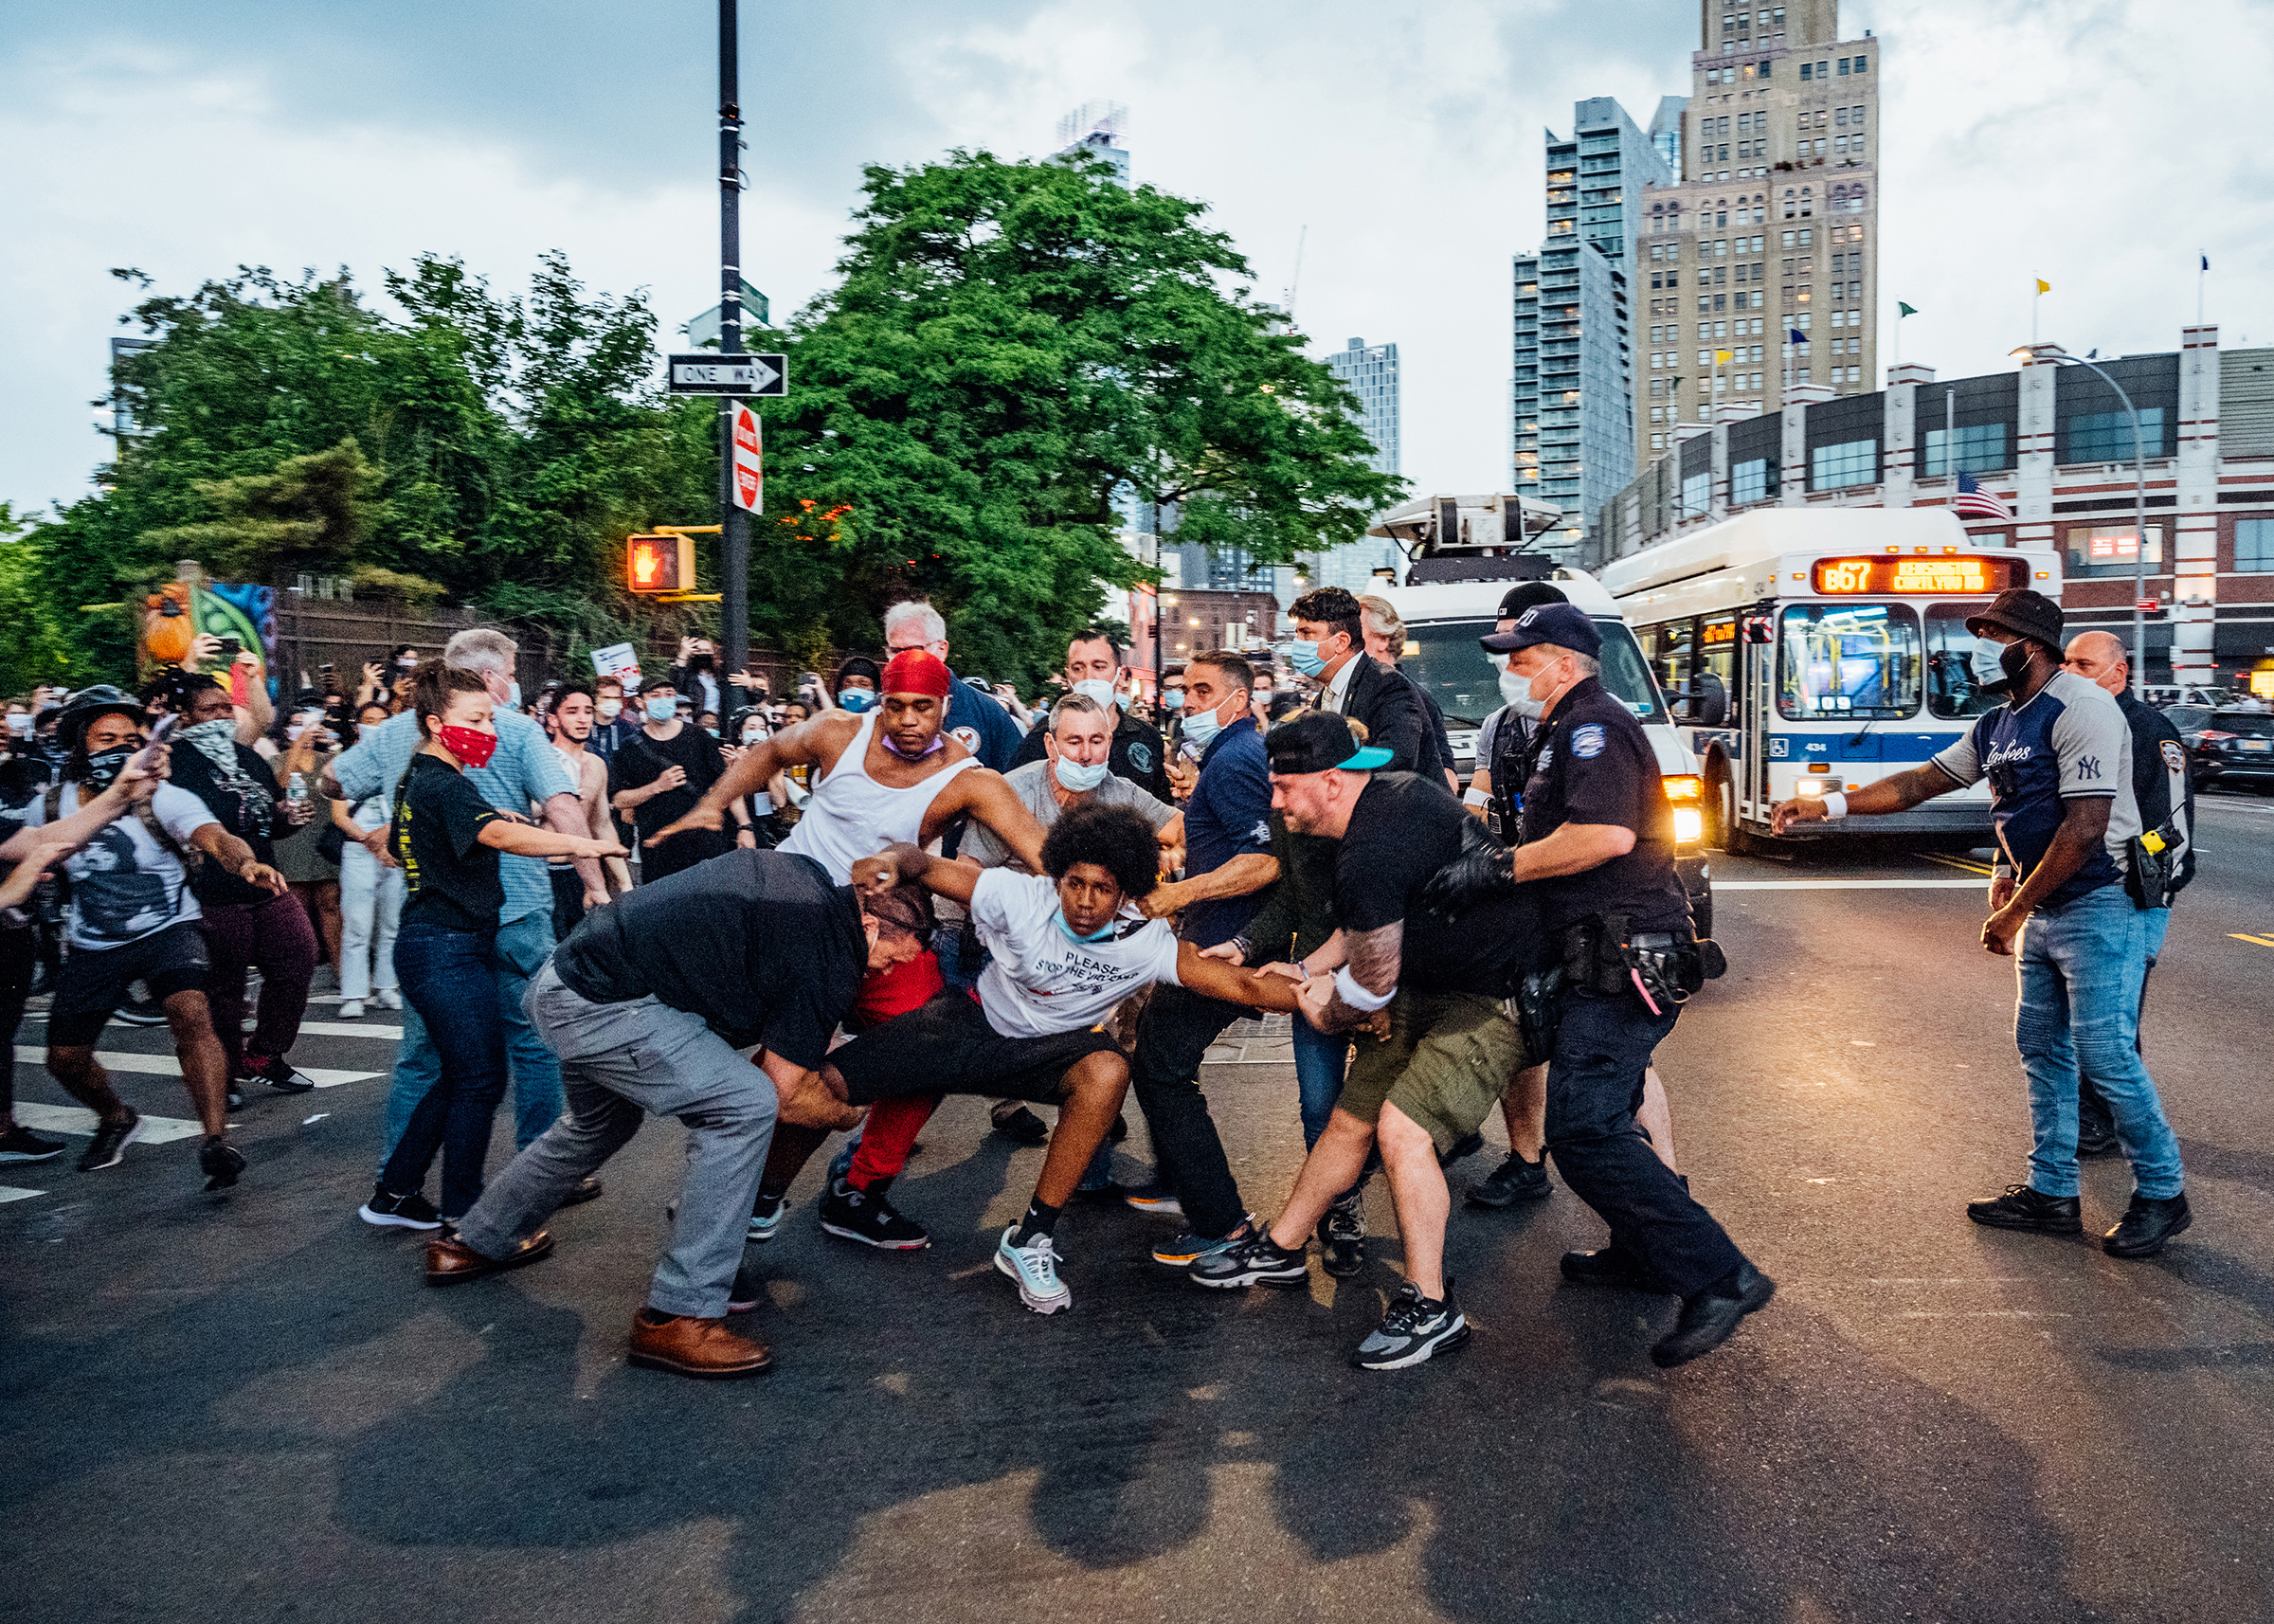 A protester, wearing a shirt that reads "Please Stop the Violence," is dragged near Brooklyn's Barclays Center on May 29, <a href="https://time.com/5845369/george-floyd-protests-malike-sidibe/">four days</a> after George Floyd's death. (Malike Sidibe for TIME)